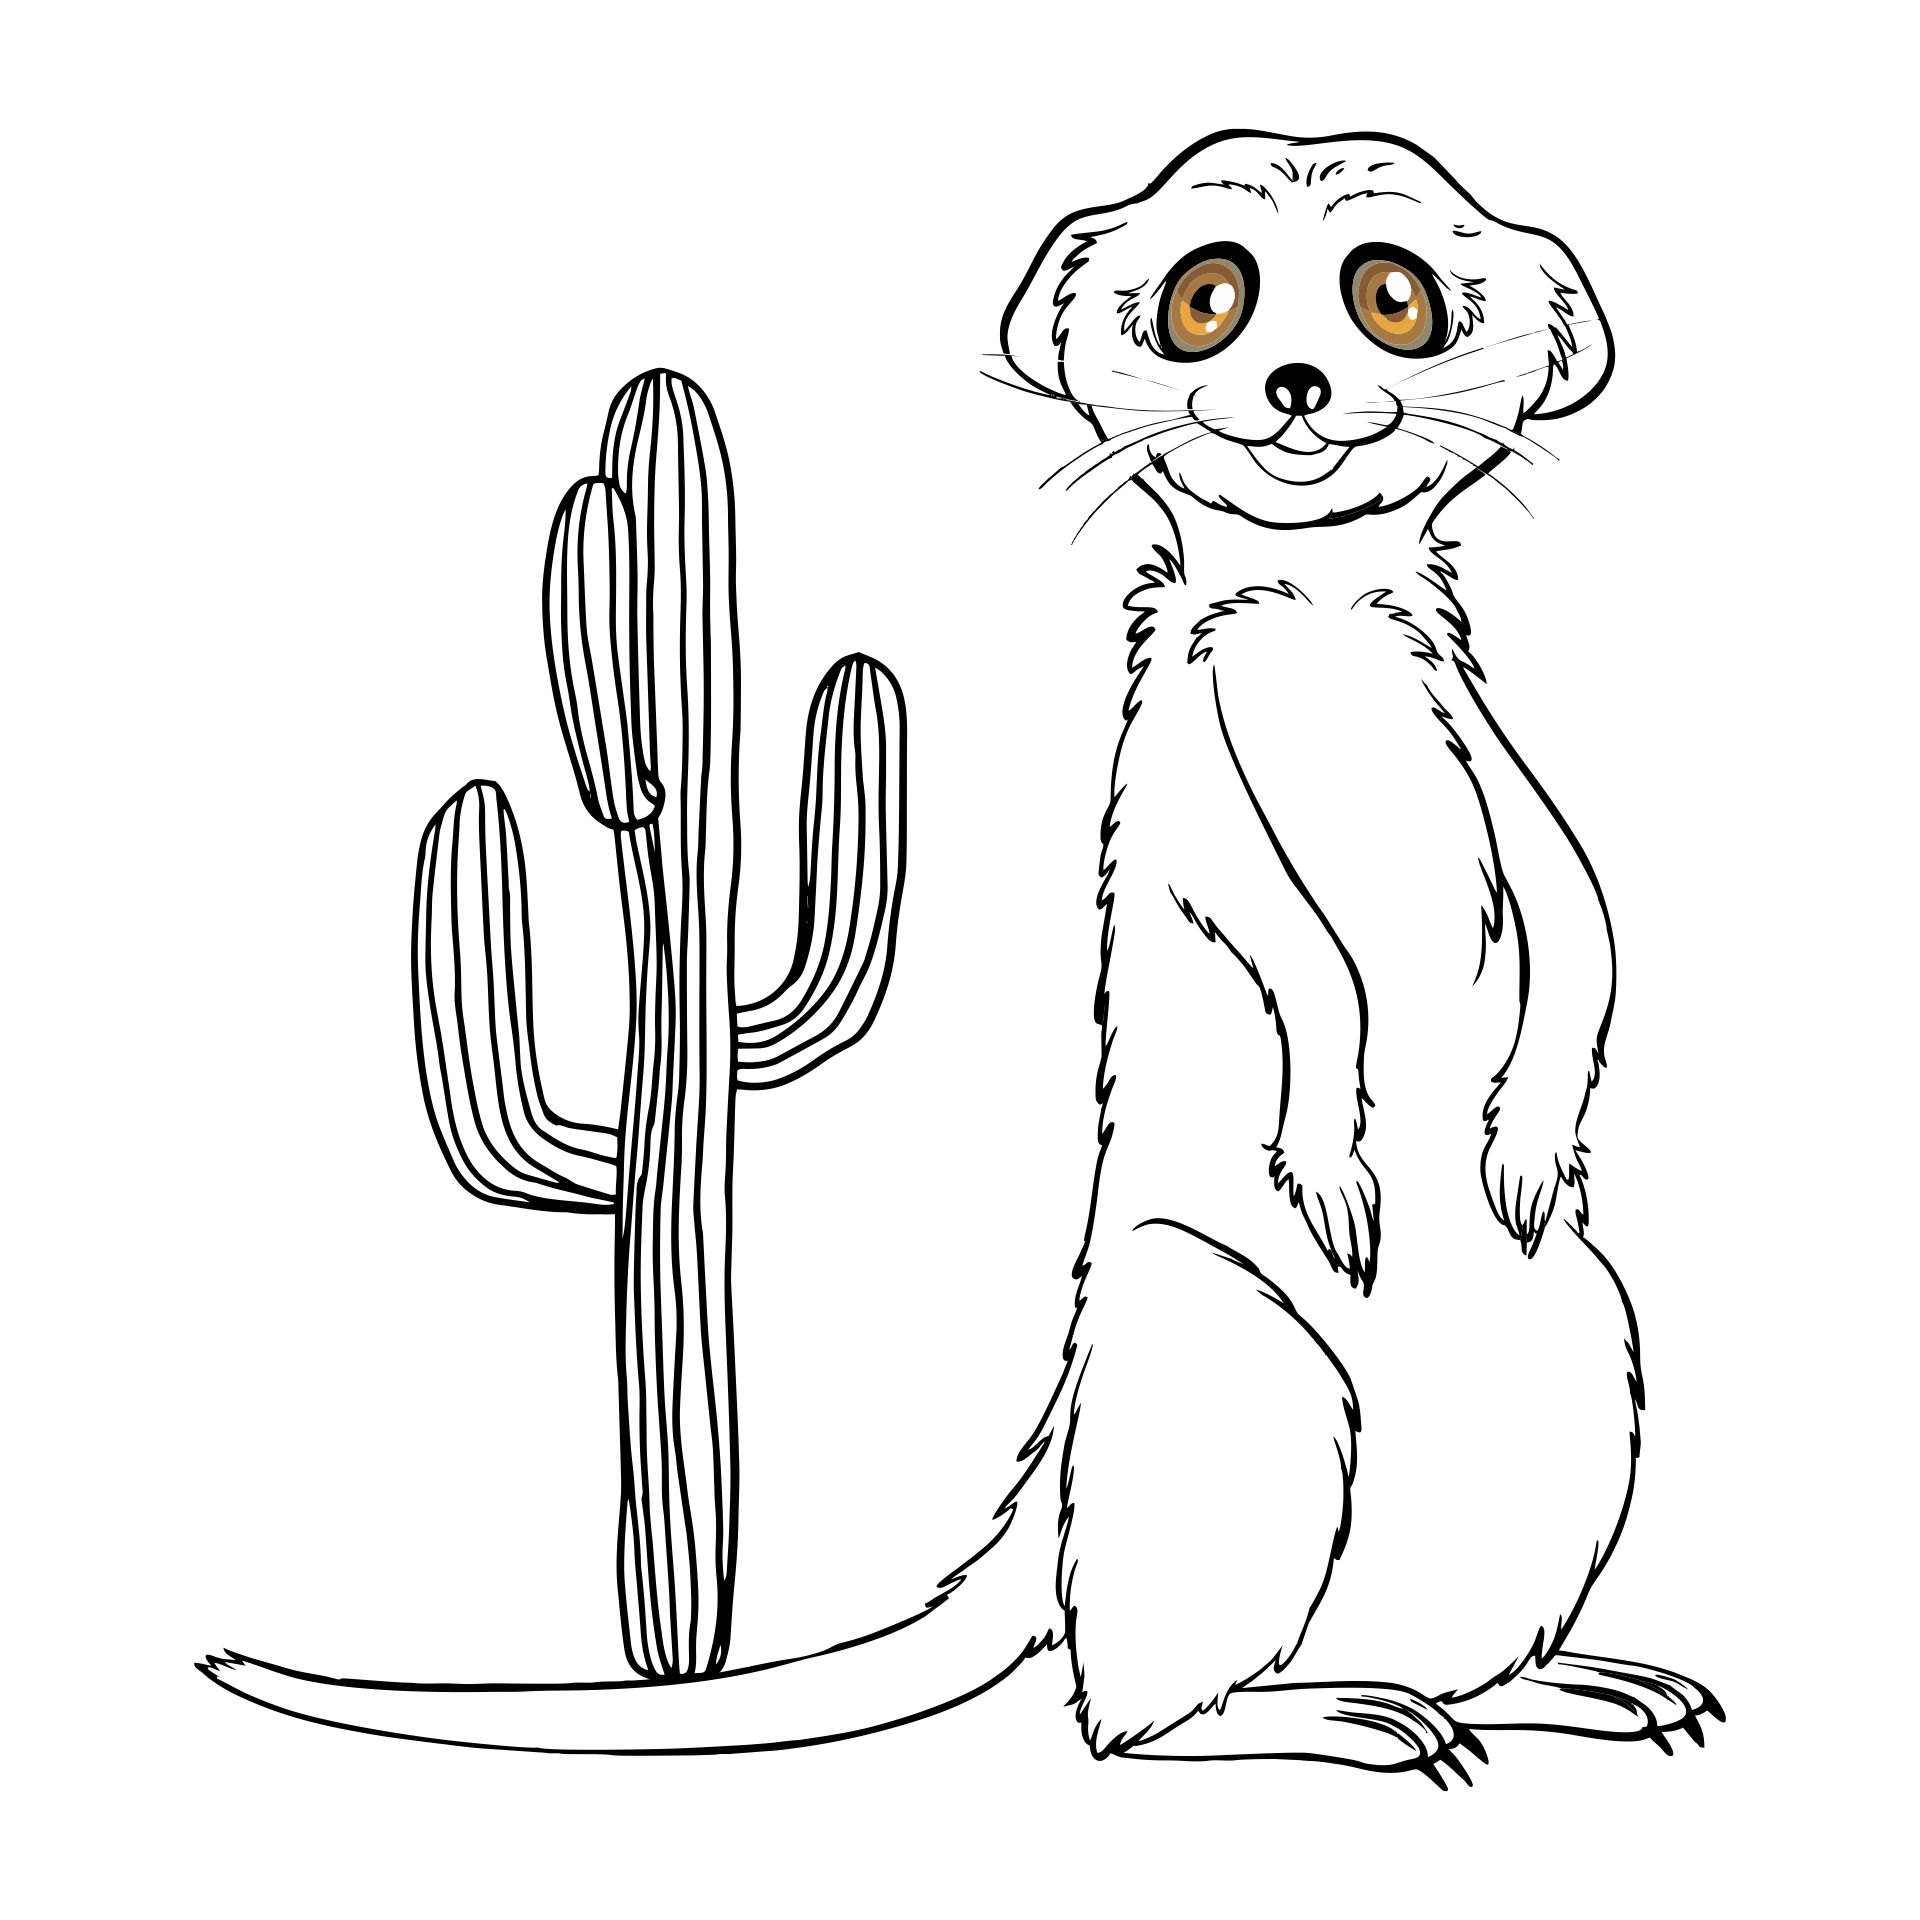 8 Best Images of Desert Coloring Pages Printable - Desert Animals